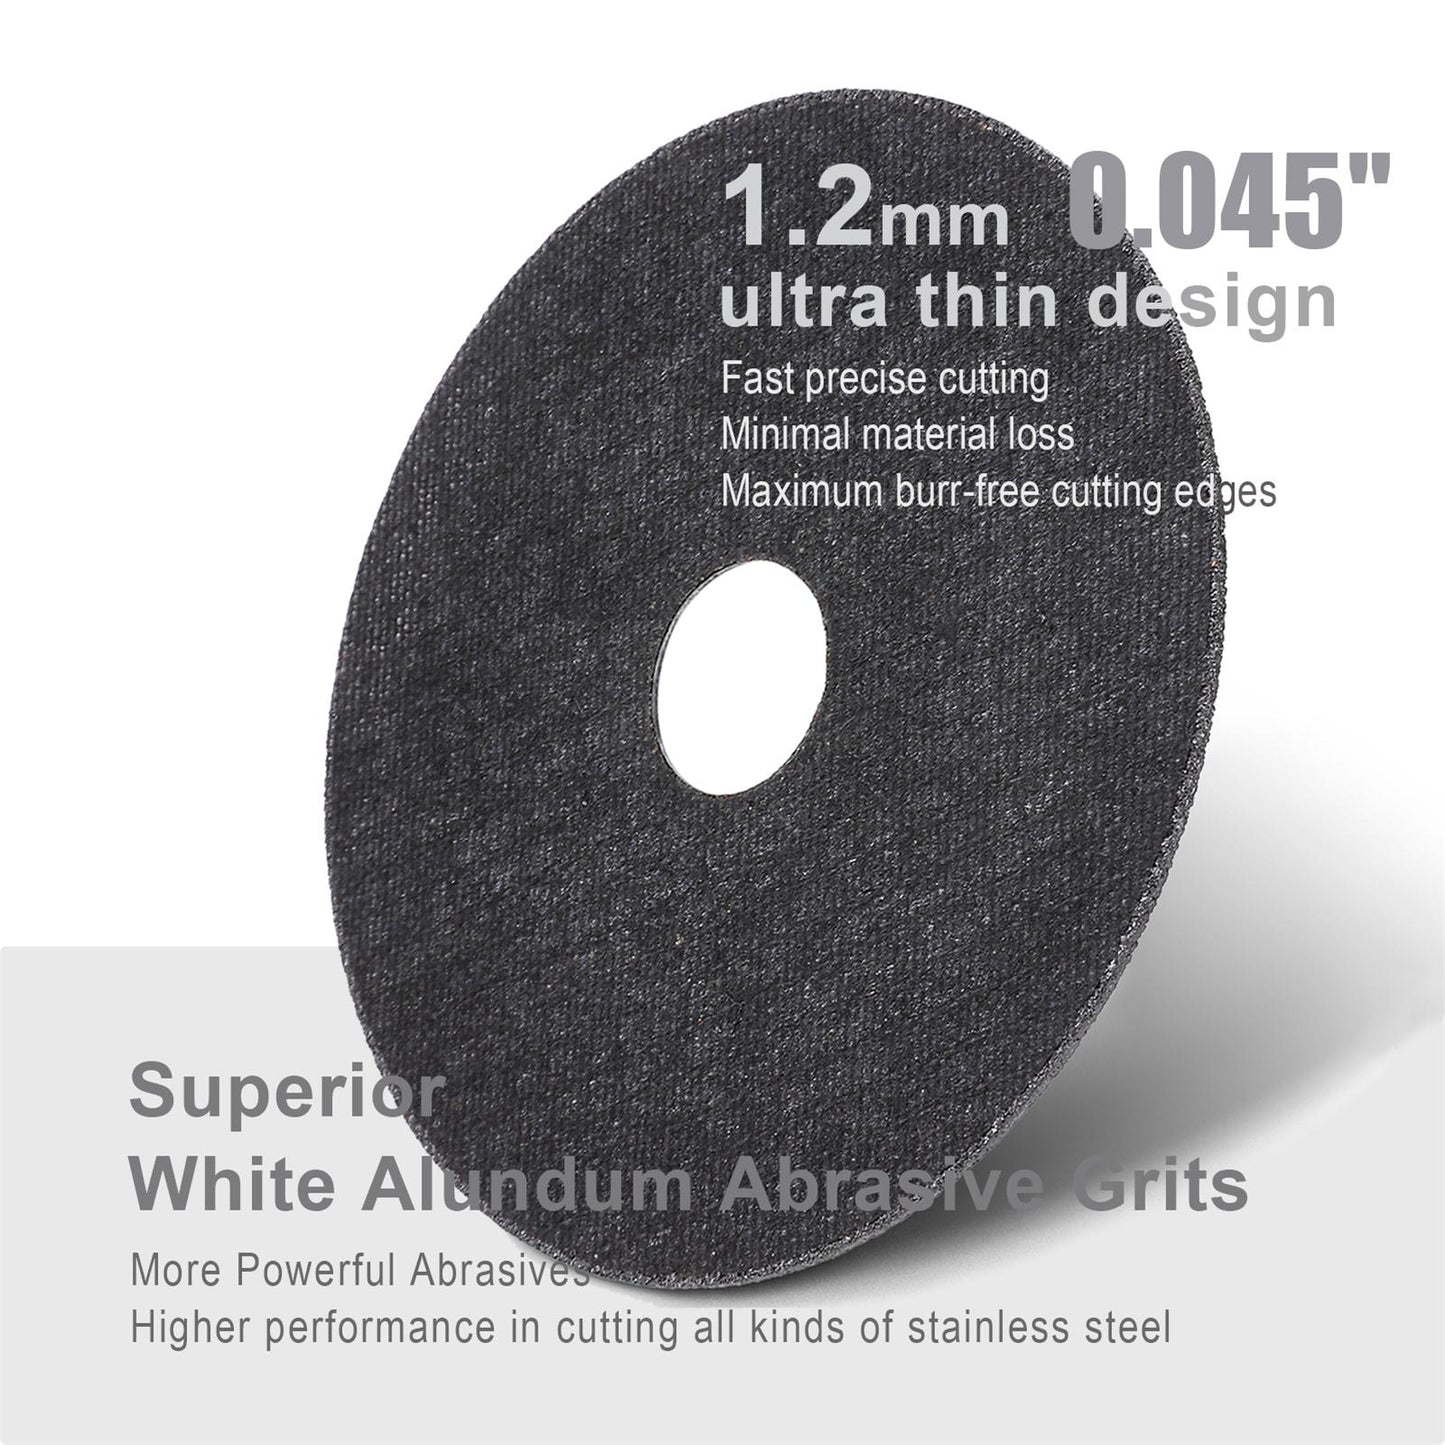 Cut Off Wheels Optimized for Cutting Stainless Steel and Other High Tensile Metals, 4-1/2" x .045" x 7/8" - 25 Pack